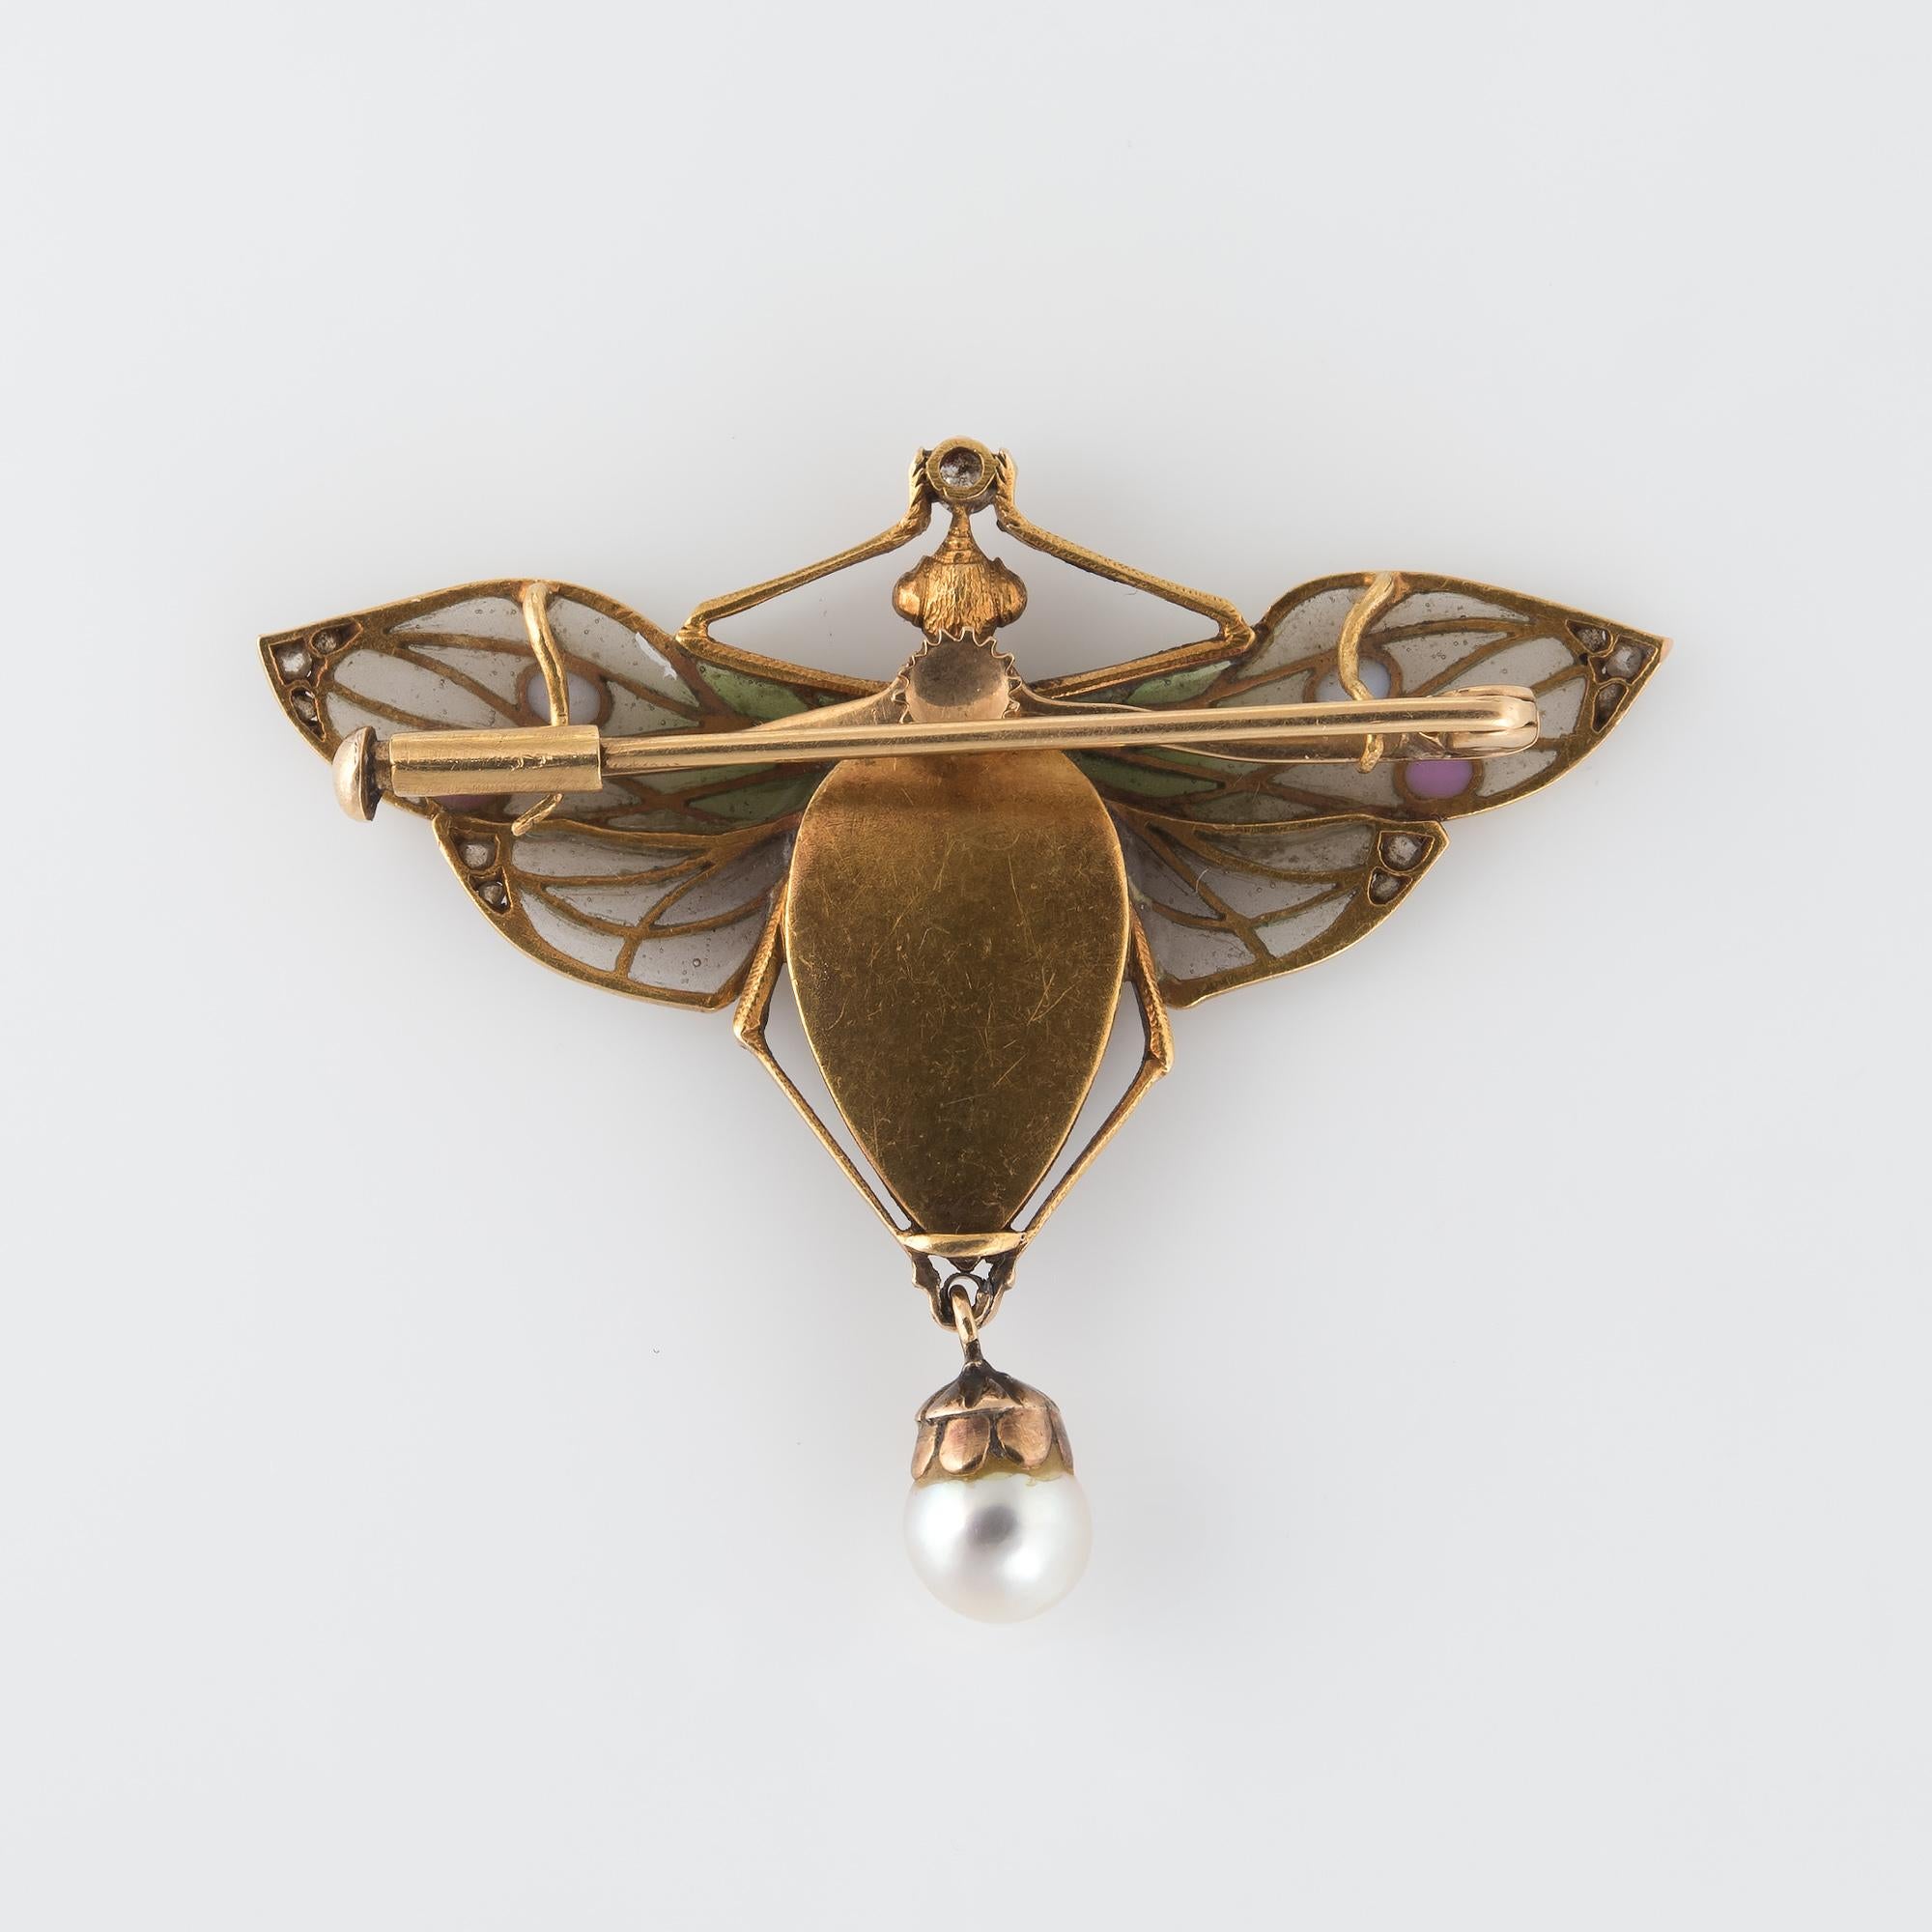 Captivating antique Art Nouveau plique-a-jour dragonfly brooch/pendant crafted in 18 karat yellow gold (circa 1900 to 1910s).  

Old mine and rose cut diamonds range in size from 0.01 to 0.05 carats. The total diamond weight is estimated at 0.19